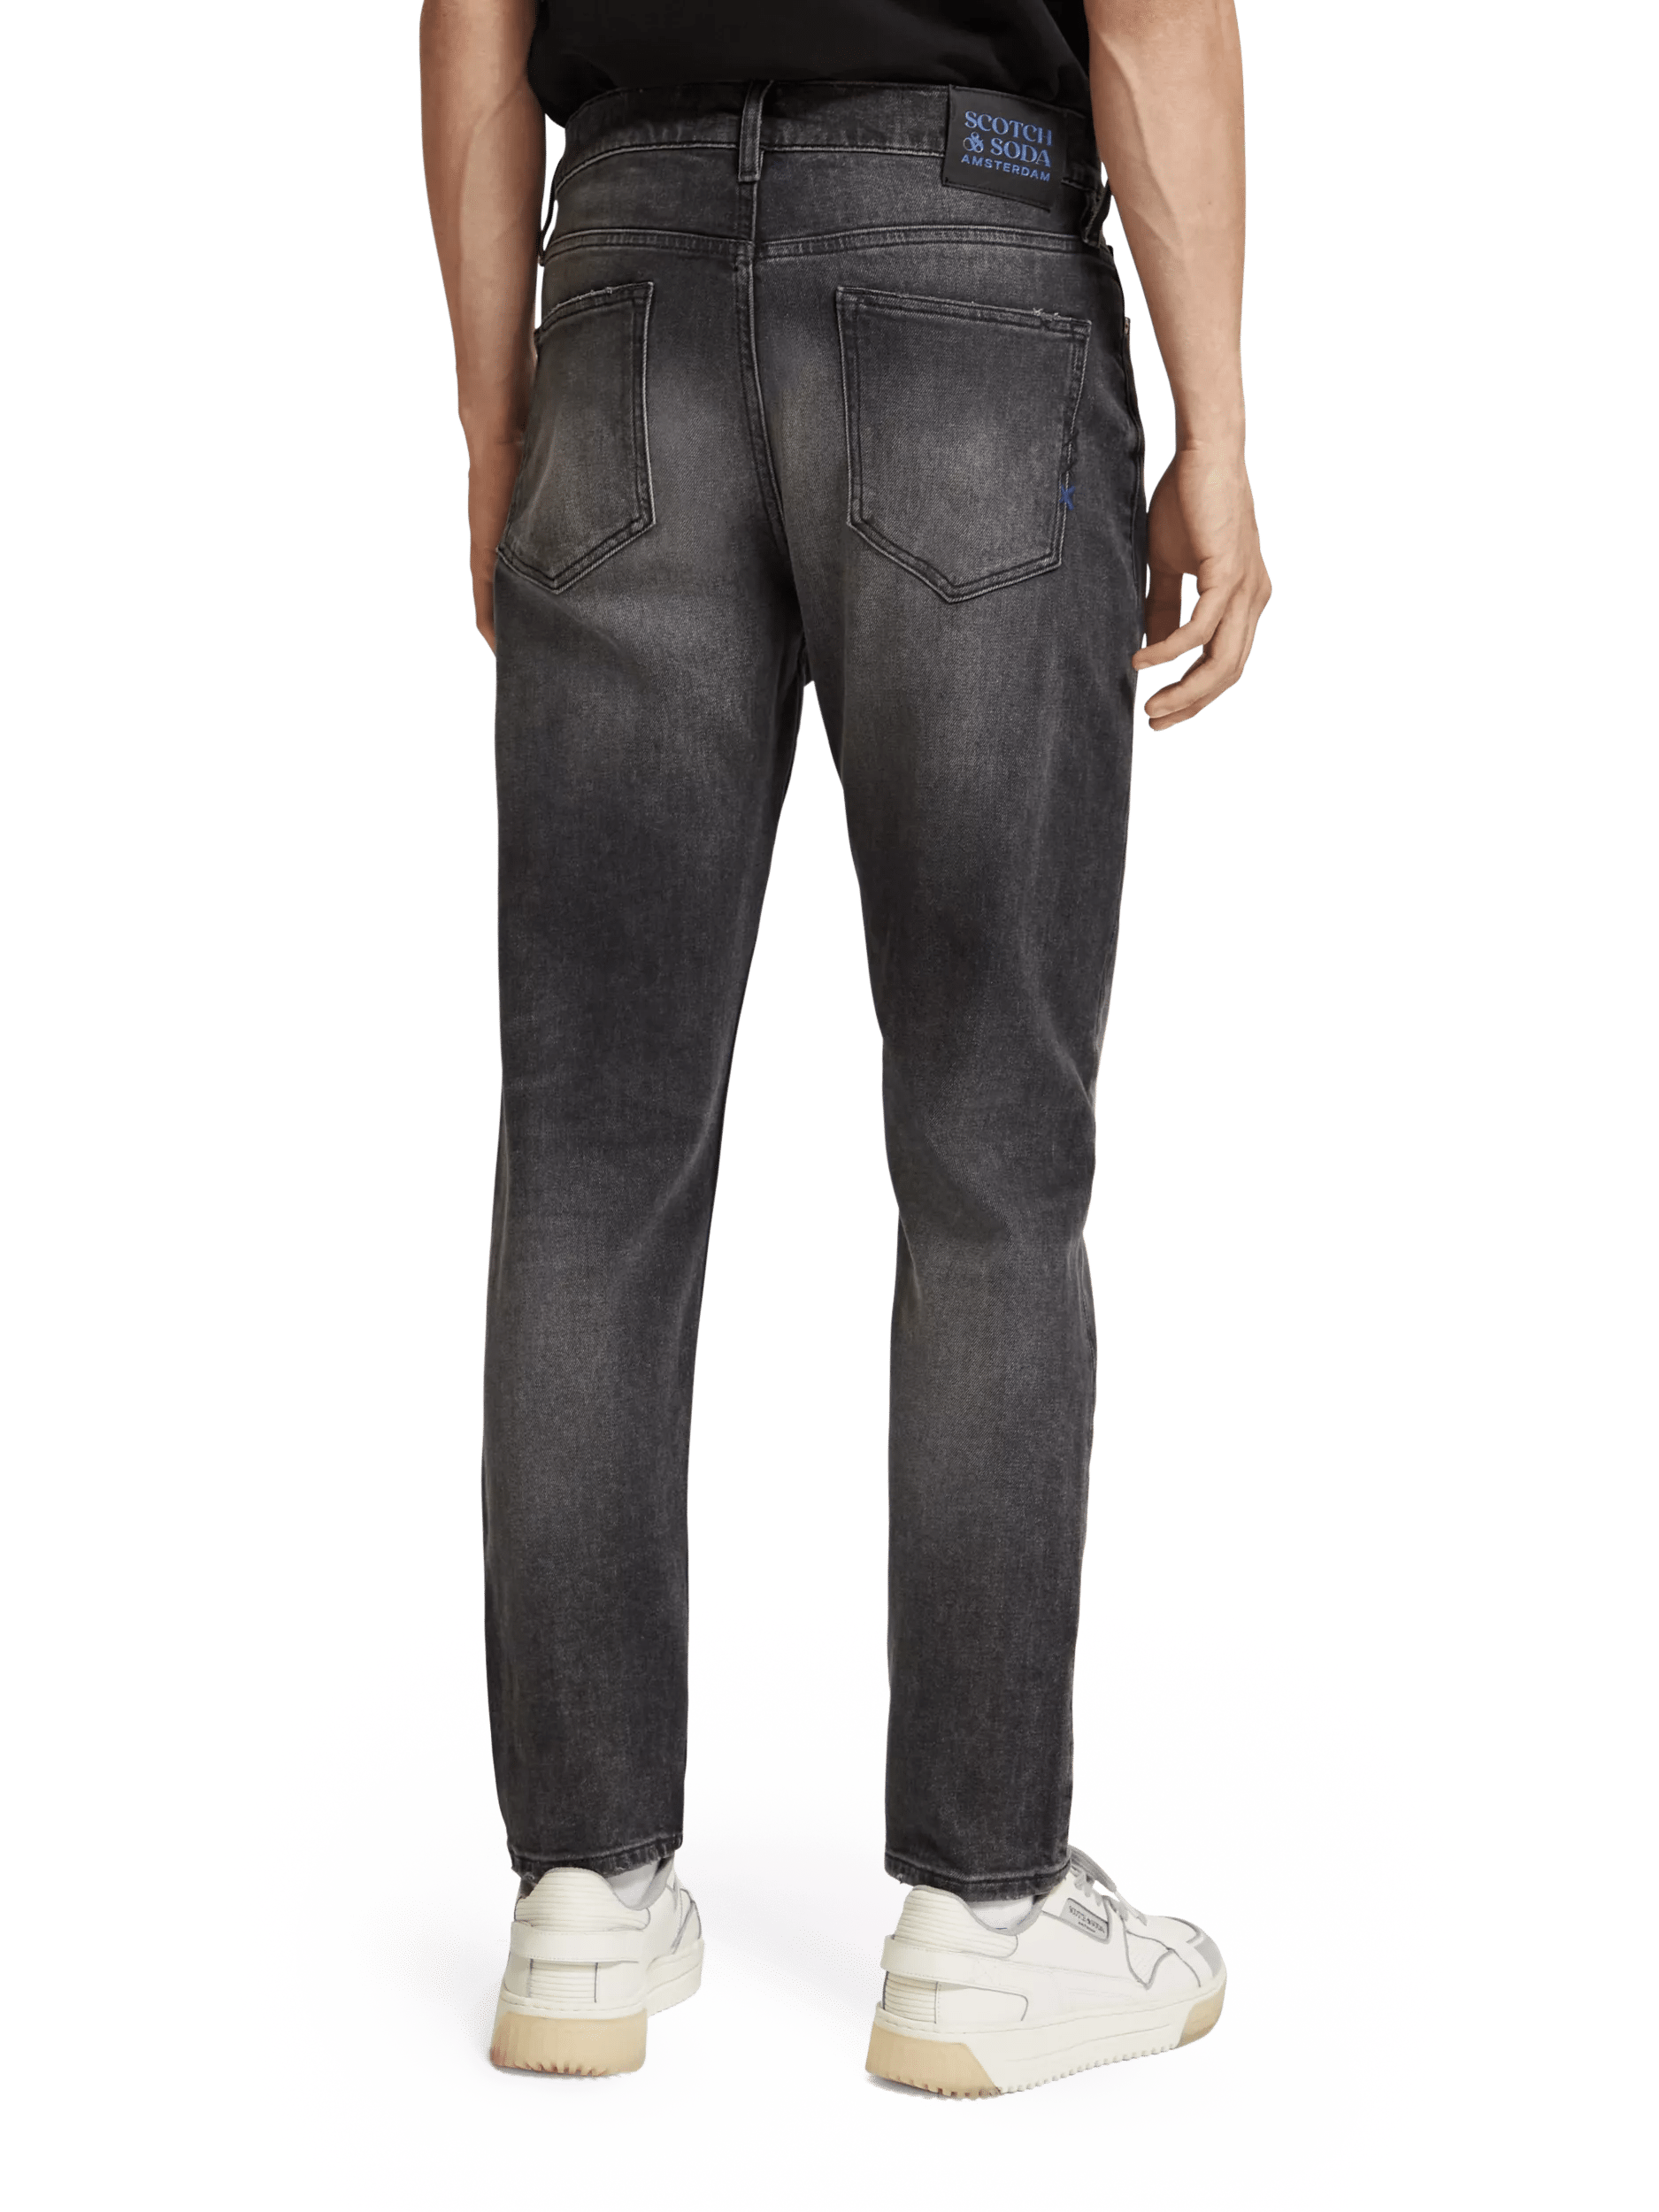 Scotch & Soda The Drop regular tapered jeans FIT-BCK